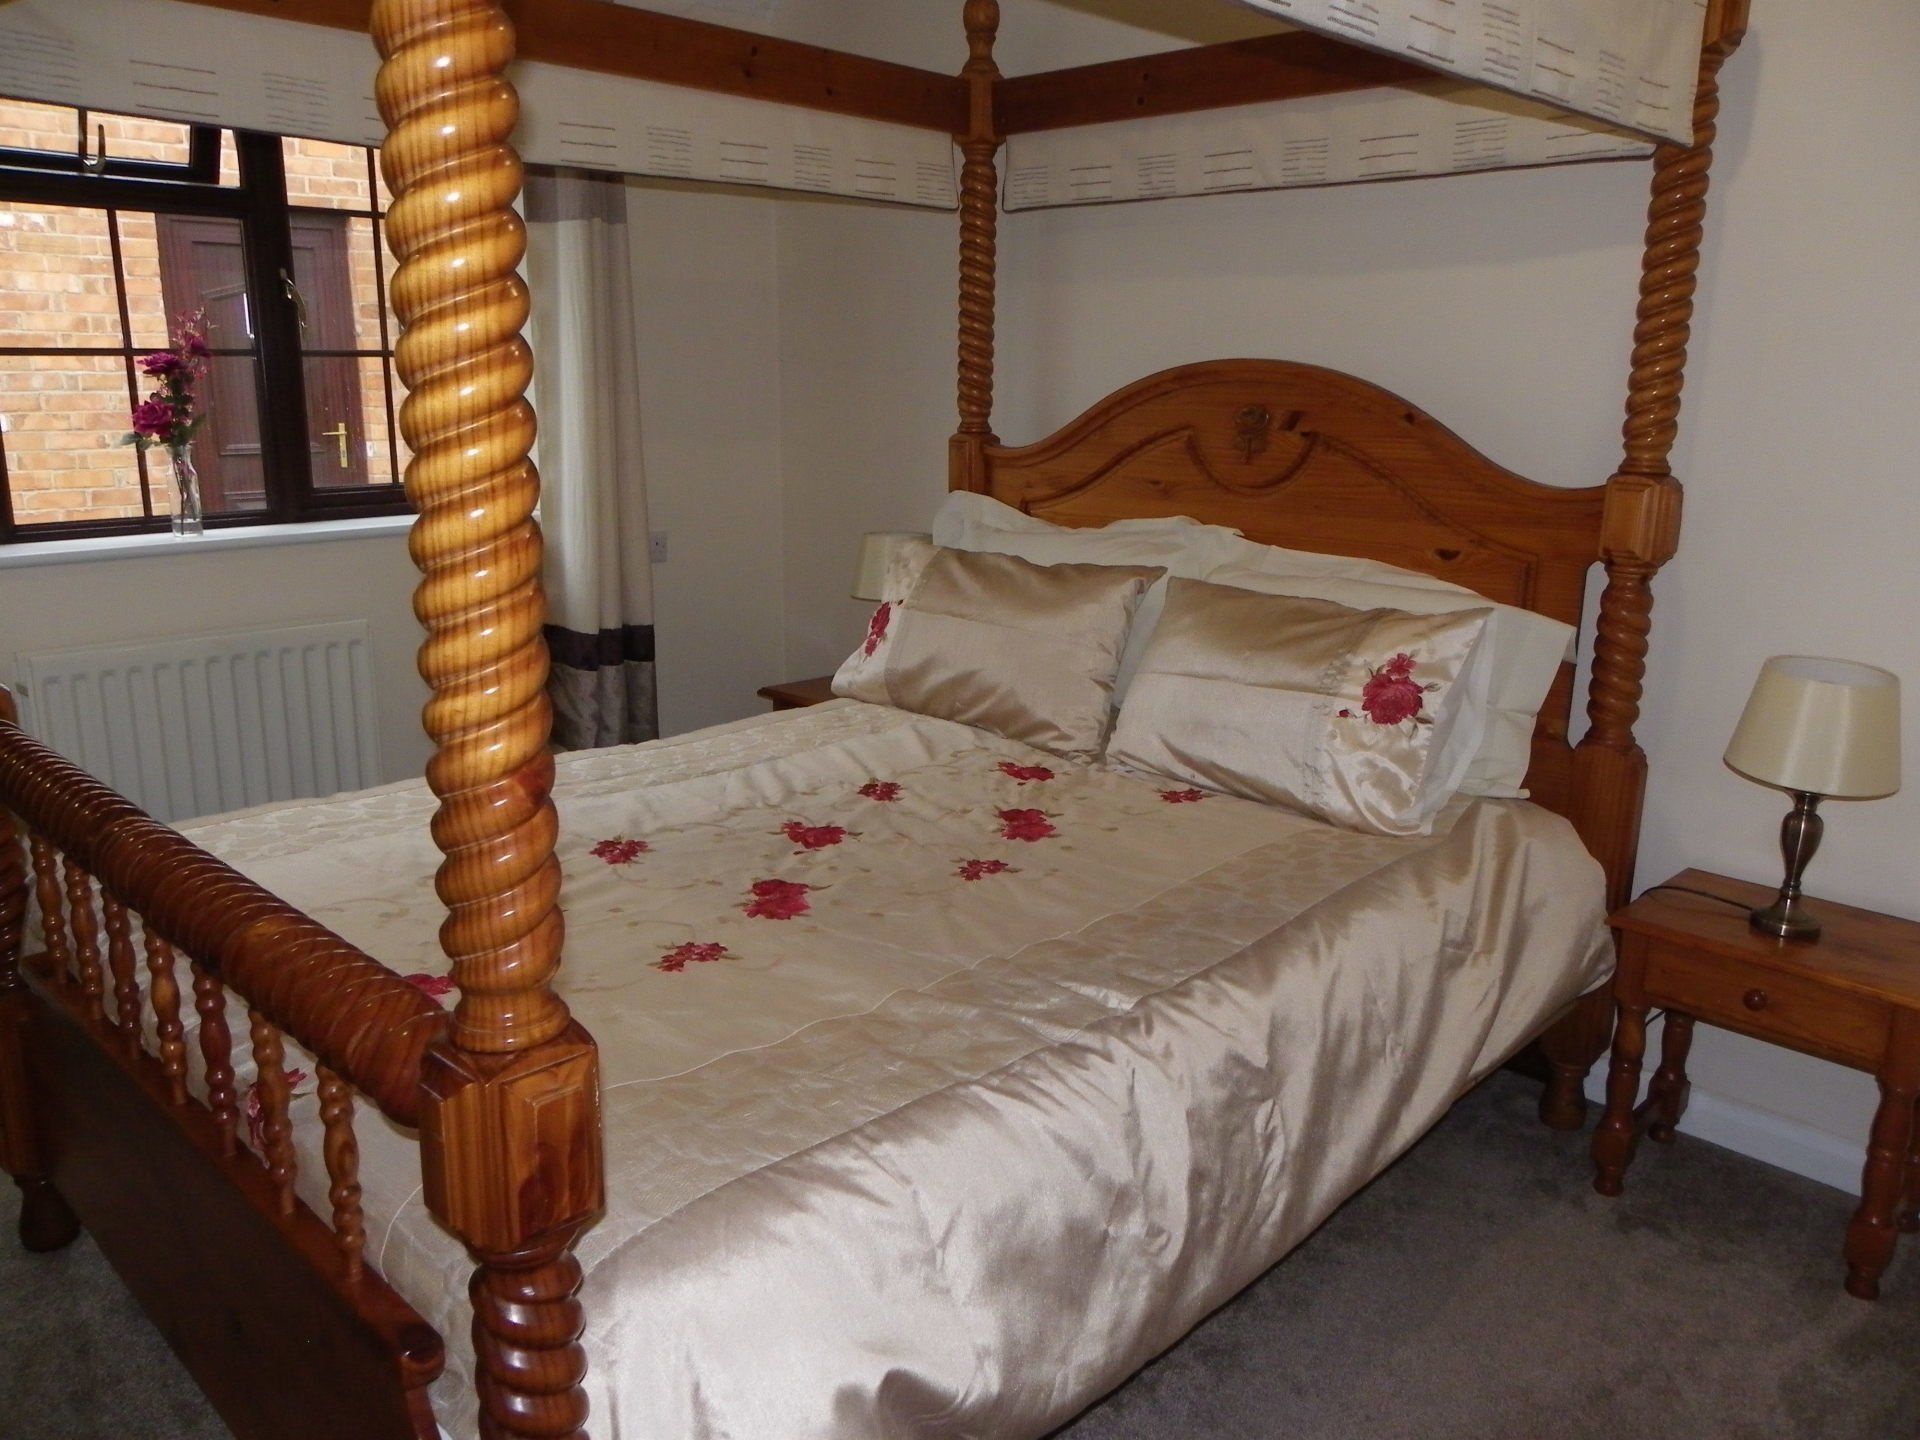 Bedroom of the holiday cottage near Burnham-on-Sea.